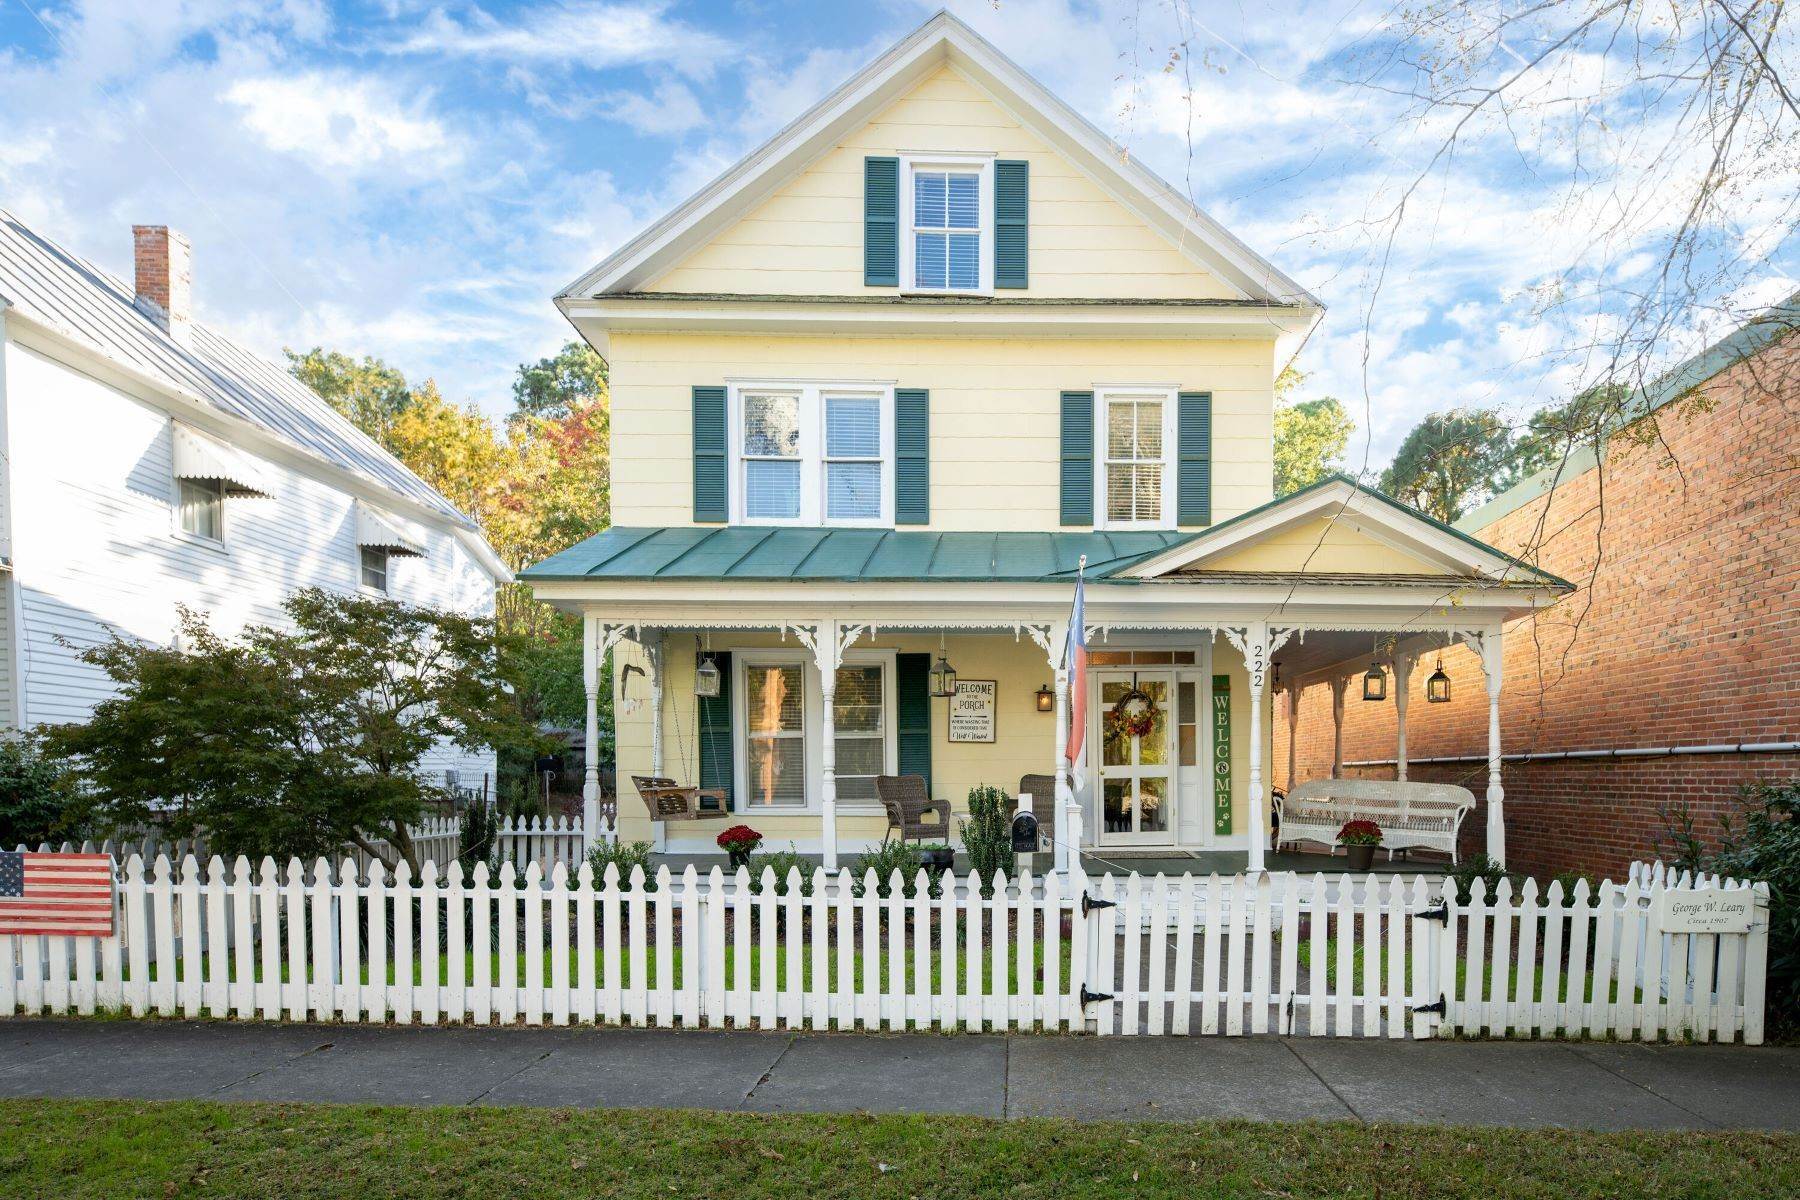 Single Family Homes for Sale at HISTORIC QUEEN ANNE HOME 222 E Queen St Edenton, North Carolina 27932 United States